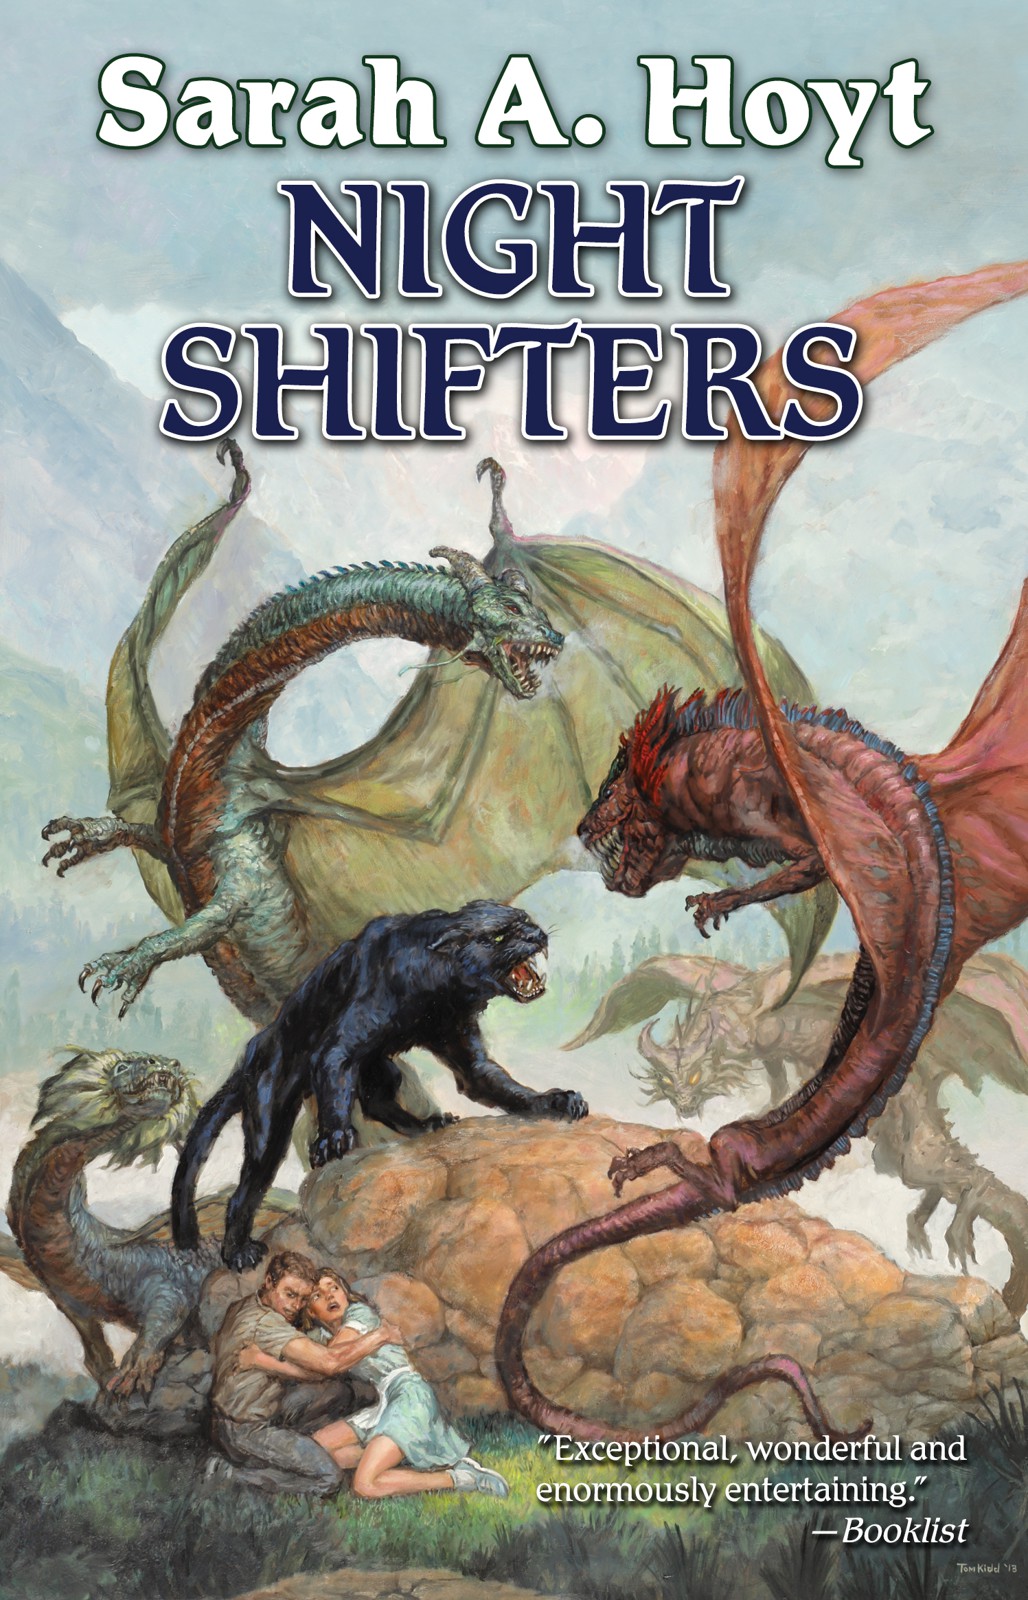 Night Shifters by Sarah A. Hoyt